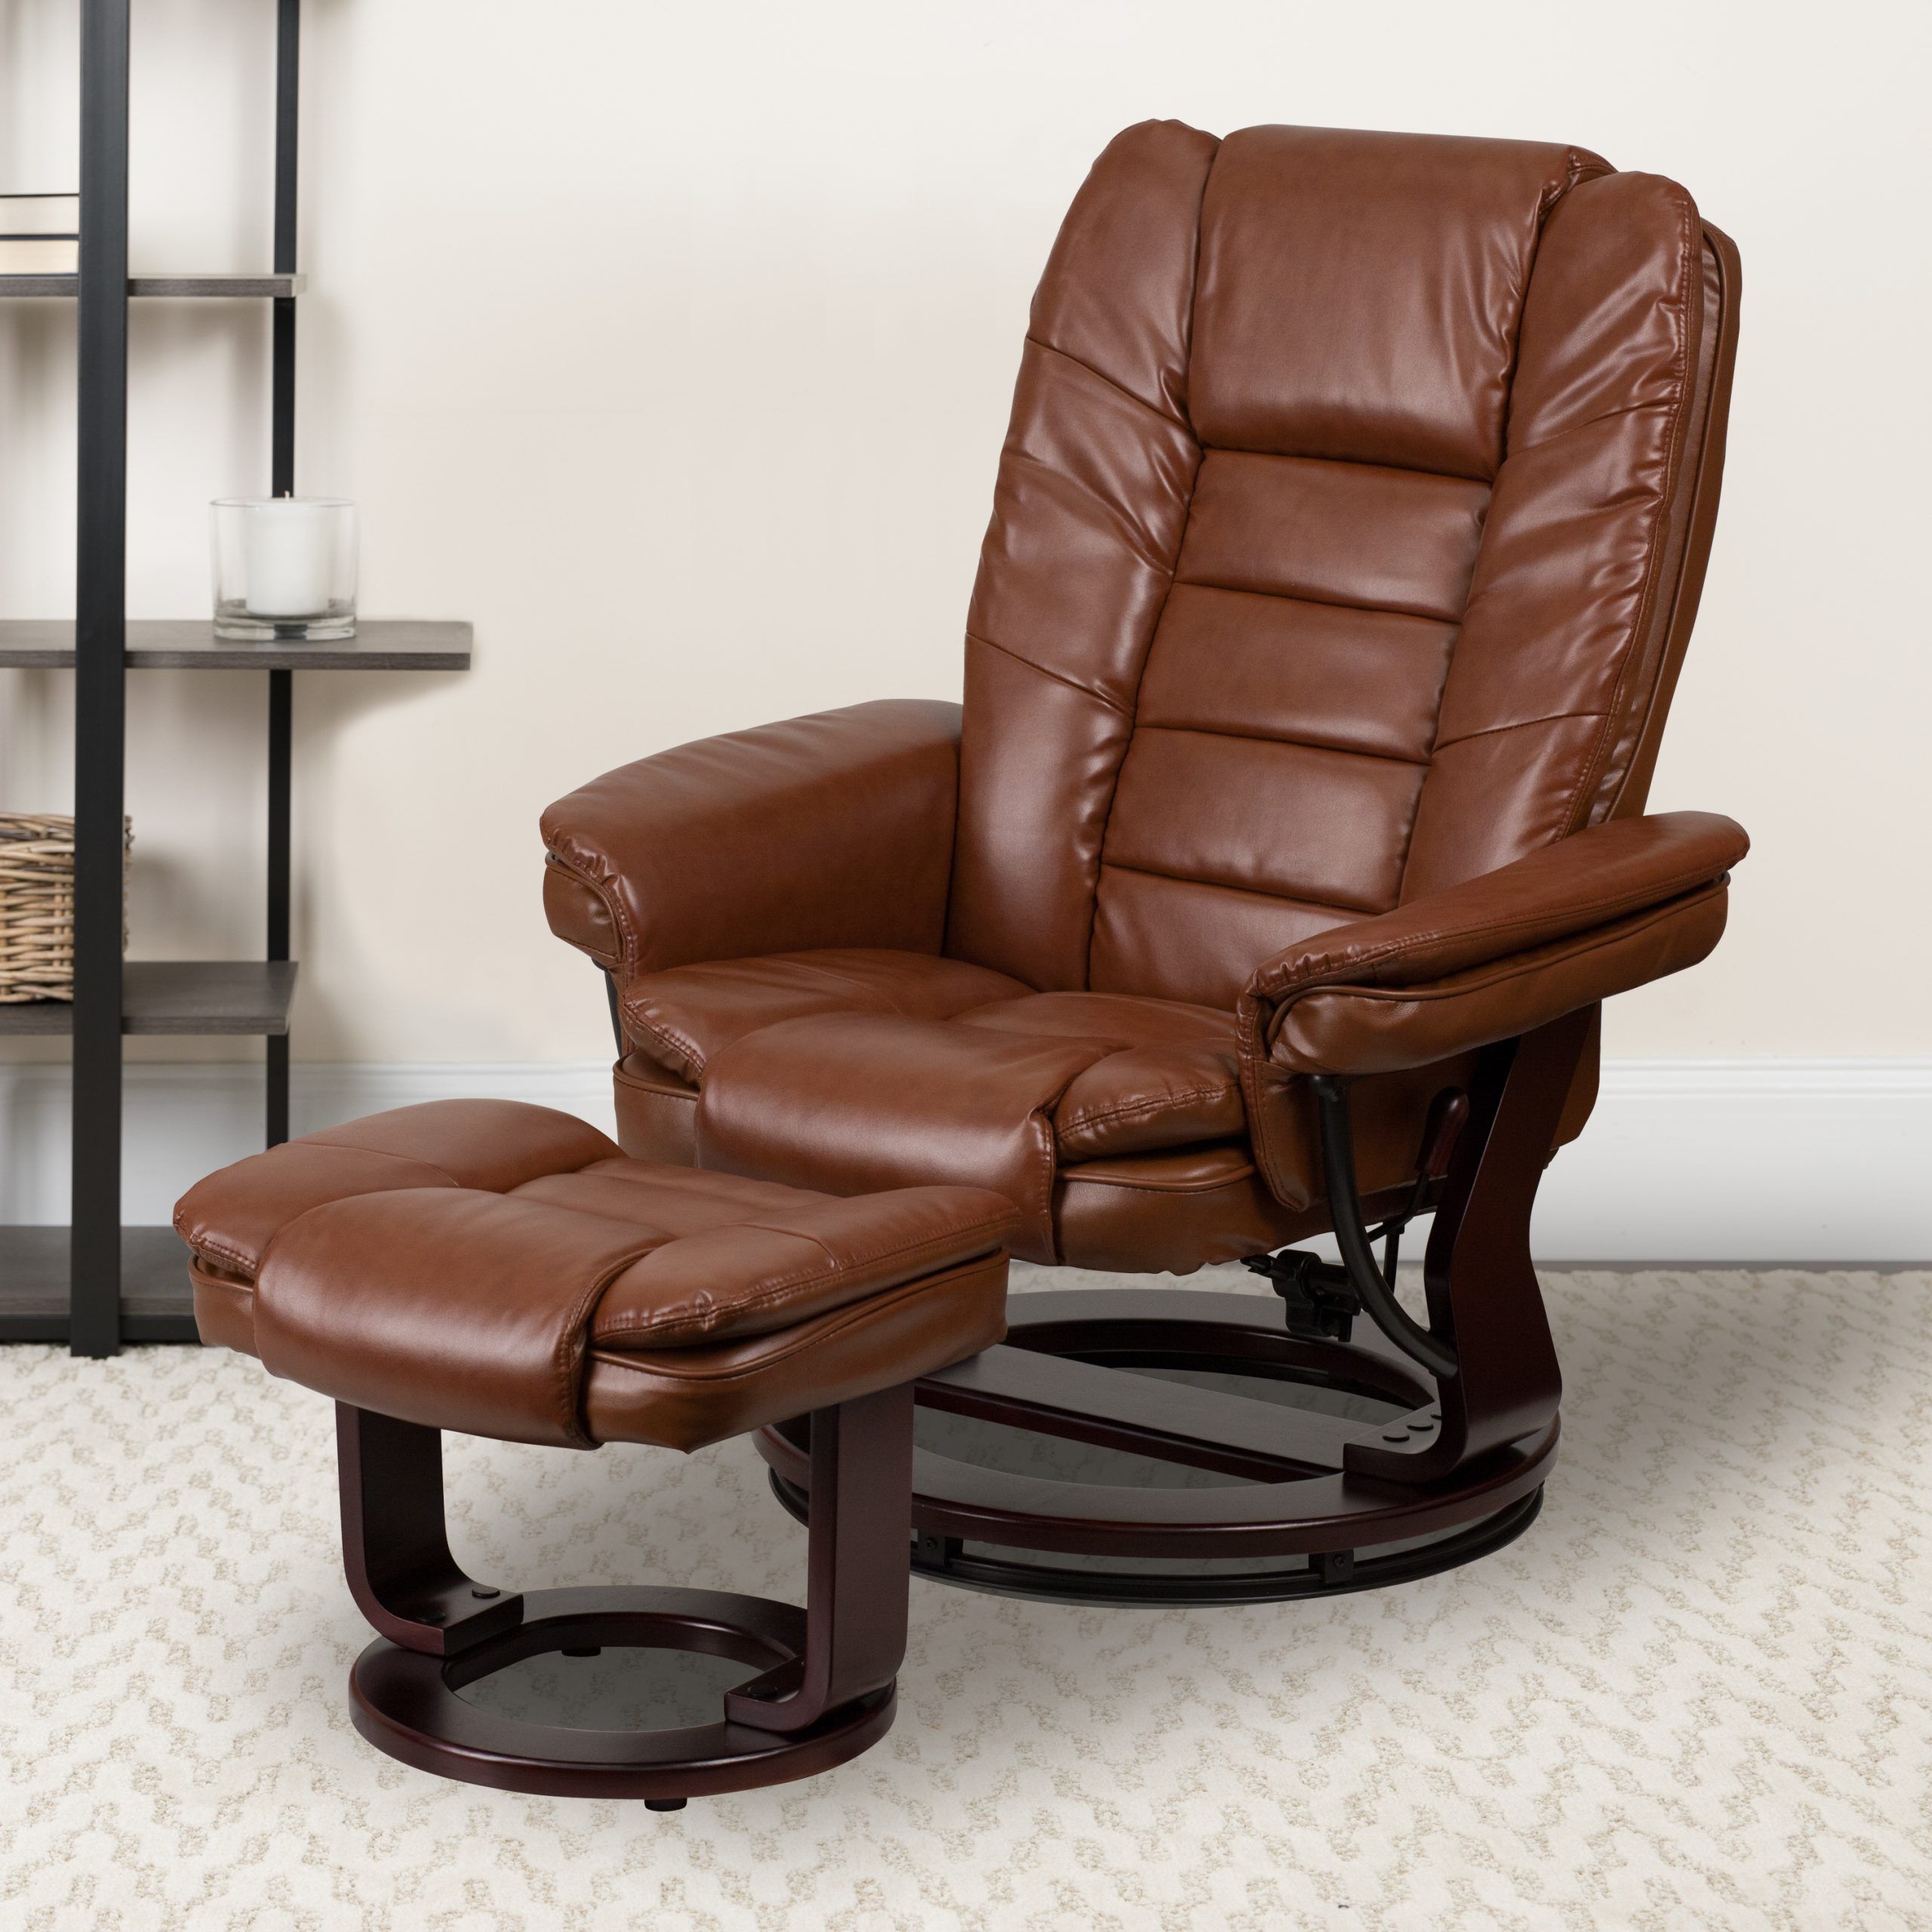 Most Up To Date Chrome Swivel Ottomans In Flash Furniture Contemporary Multi Position Recliner With Horizontal (View 3 of 10)